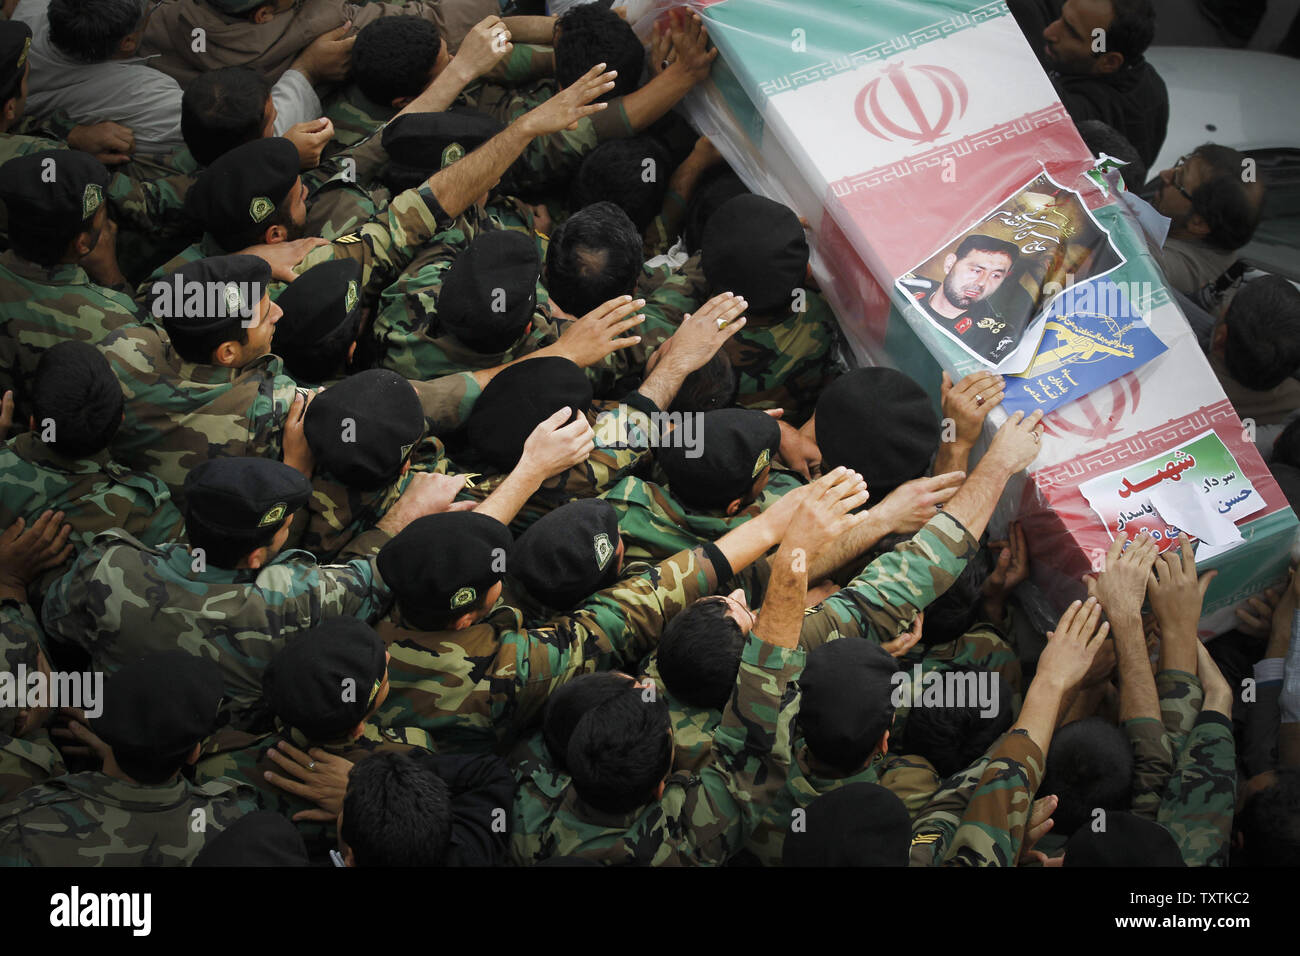 Iranians carry the flag draped coffins containing the remains of a  Revolutionary Guard soldiers  who were killed in explosion in Bidegeneh village, about 35 Kilometers (21 miles) west of Tehran. The explosion happened on Saturday when  a munitions depot caught fire at the IRGC base in Bidgeneh village. The Total of 17 IRGC forces, including Maj. Gen. Hassan Tehrani Moqaddam, director of the Guard's Jihad Self-Sufficiency Organization were killed and 16 others were seriously injured. Tehran, Iran , November 14, 2011.     UPI/Maryam Rahmanian. Stock Photo